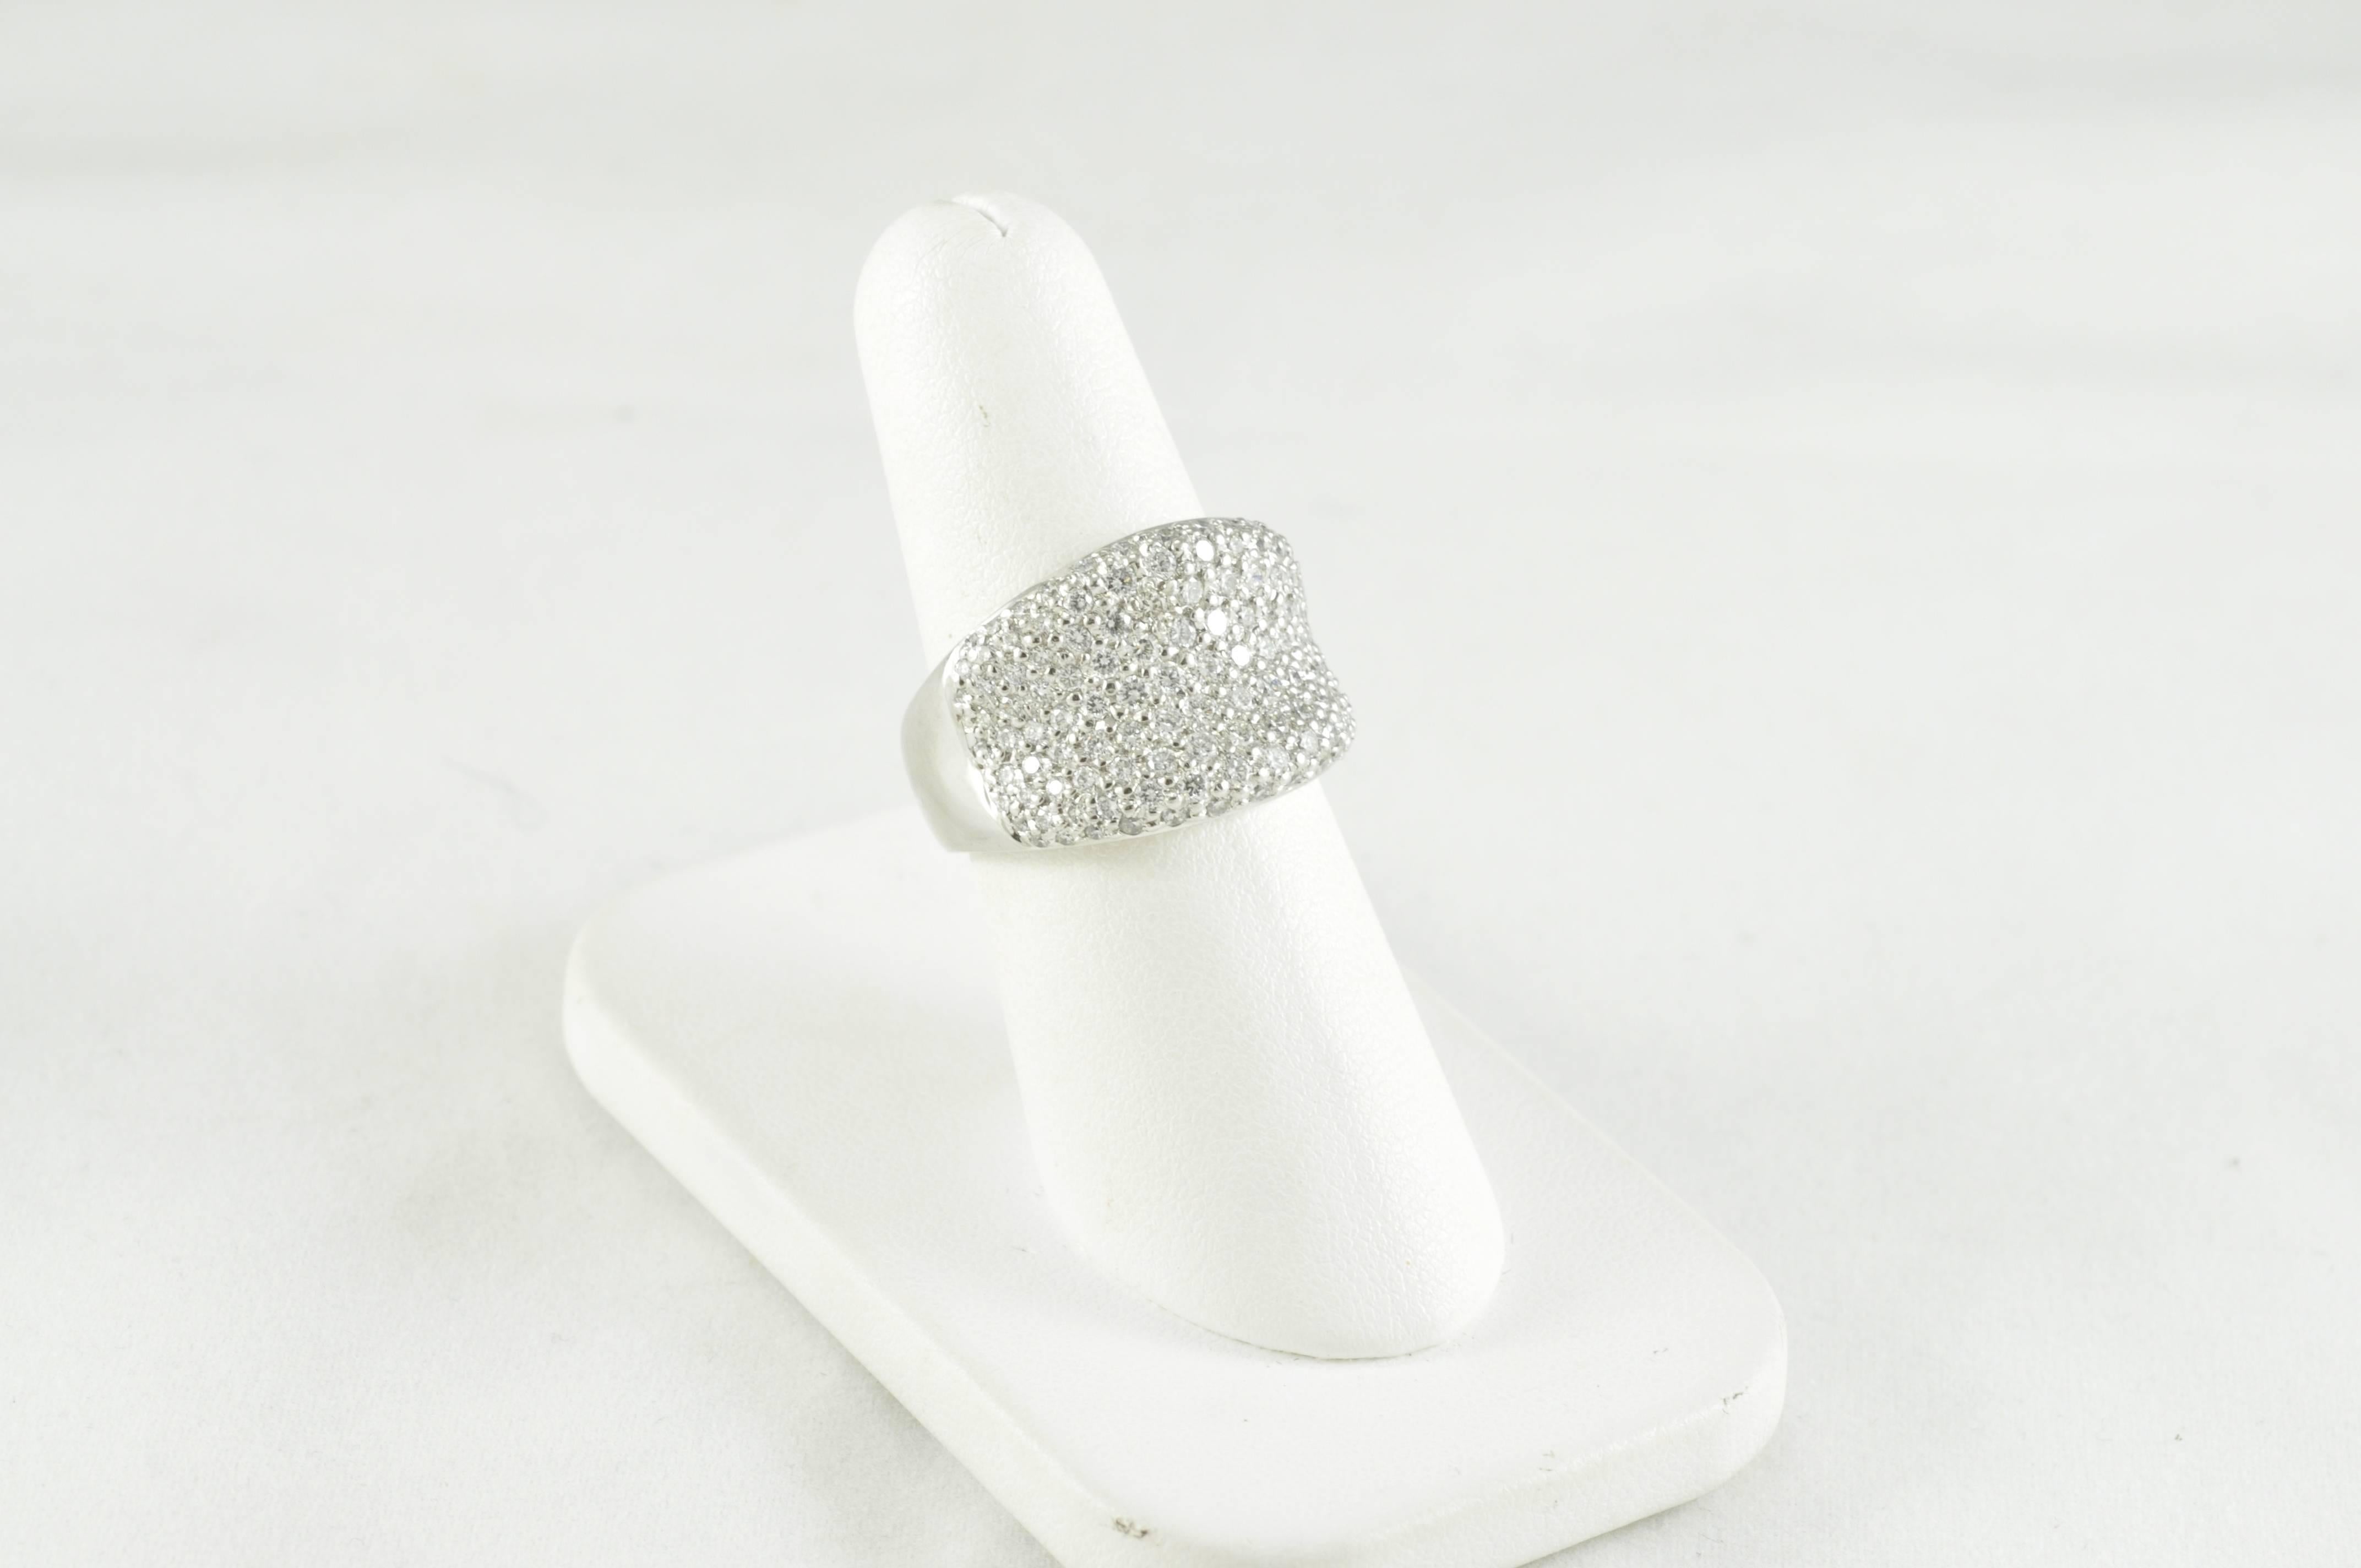 Platinum Ring Made by Award Winning Designer, Jye's.  This ring is size 7.25 and can be sized.  1.74 CTW Diamonds. Stamped PLAT JYE'S.
Slightly concave face, tapered shank fits very snugly to the finger. Beautiful pave work, excellent craftsmanship. 